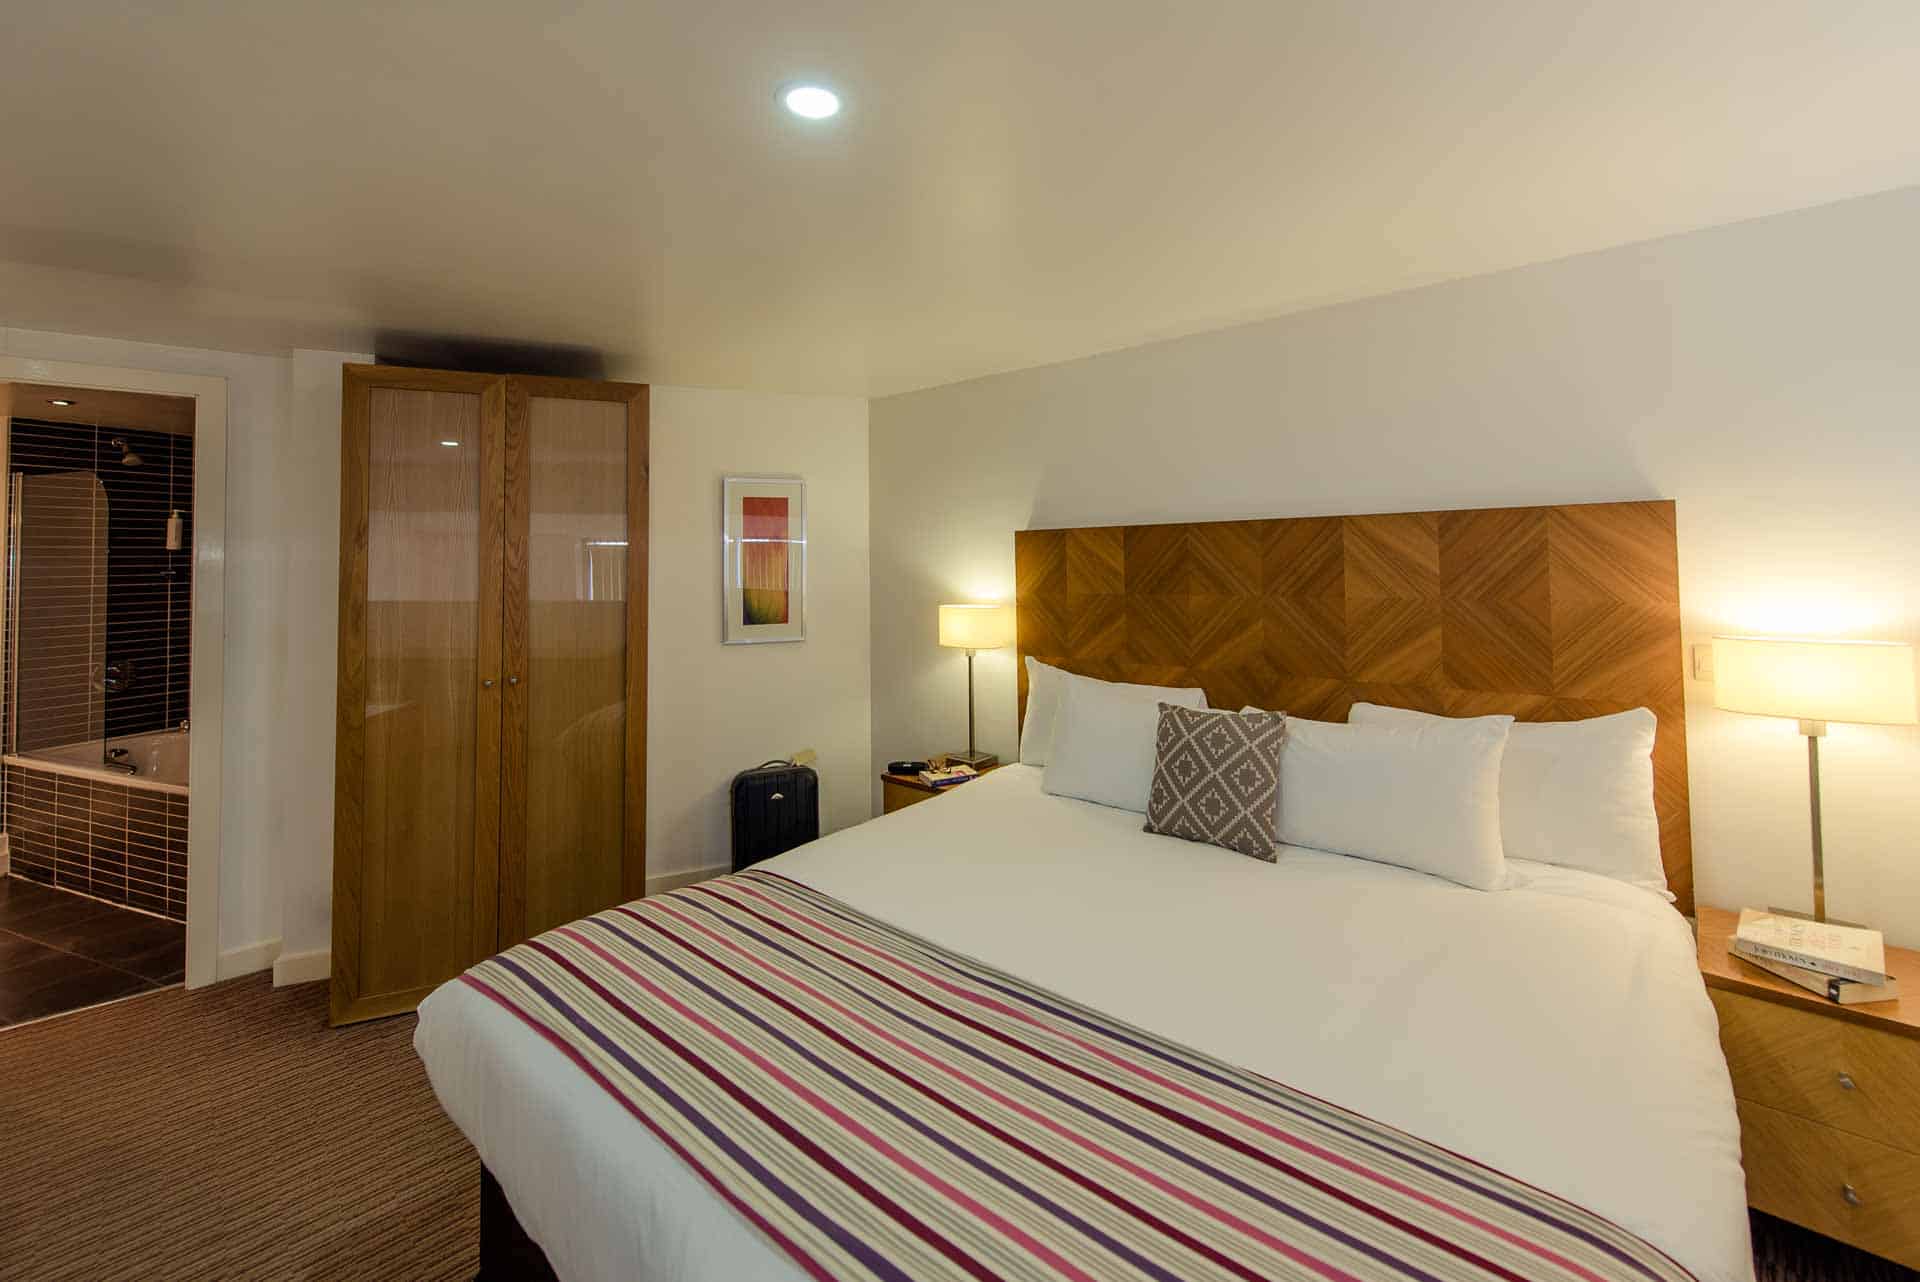 Large bedroom at PREMIER SUITES Liverpool with comfortable bed, double wardrobe, ensuite and natural light